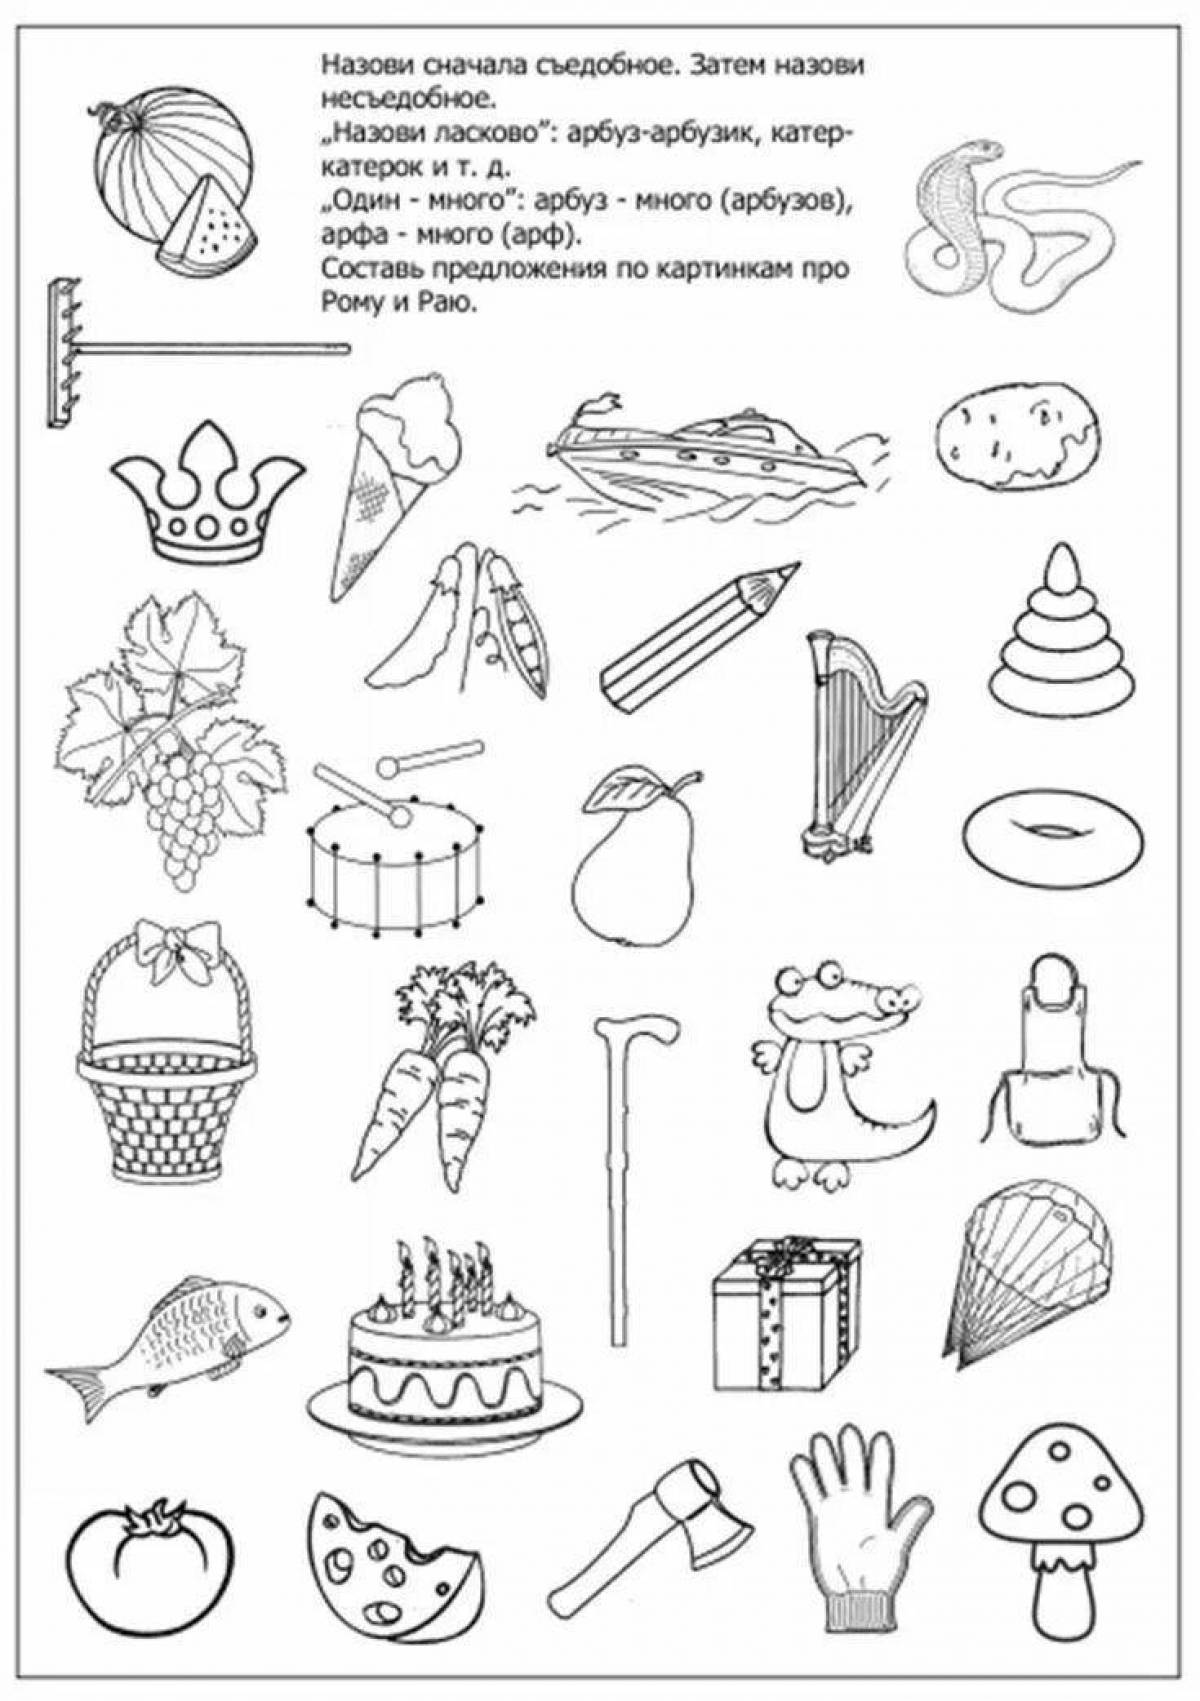 Colorful r-centered coloring book for speech therapist